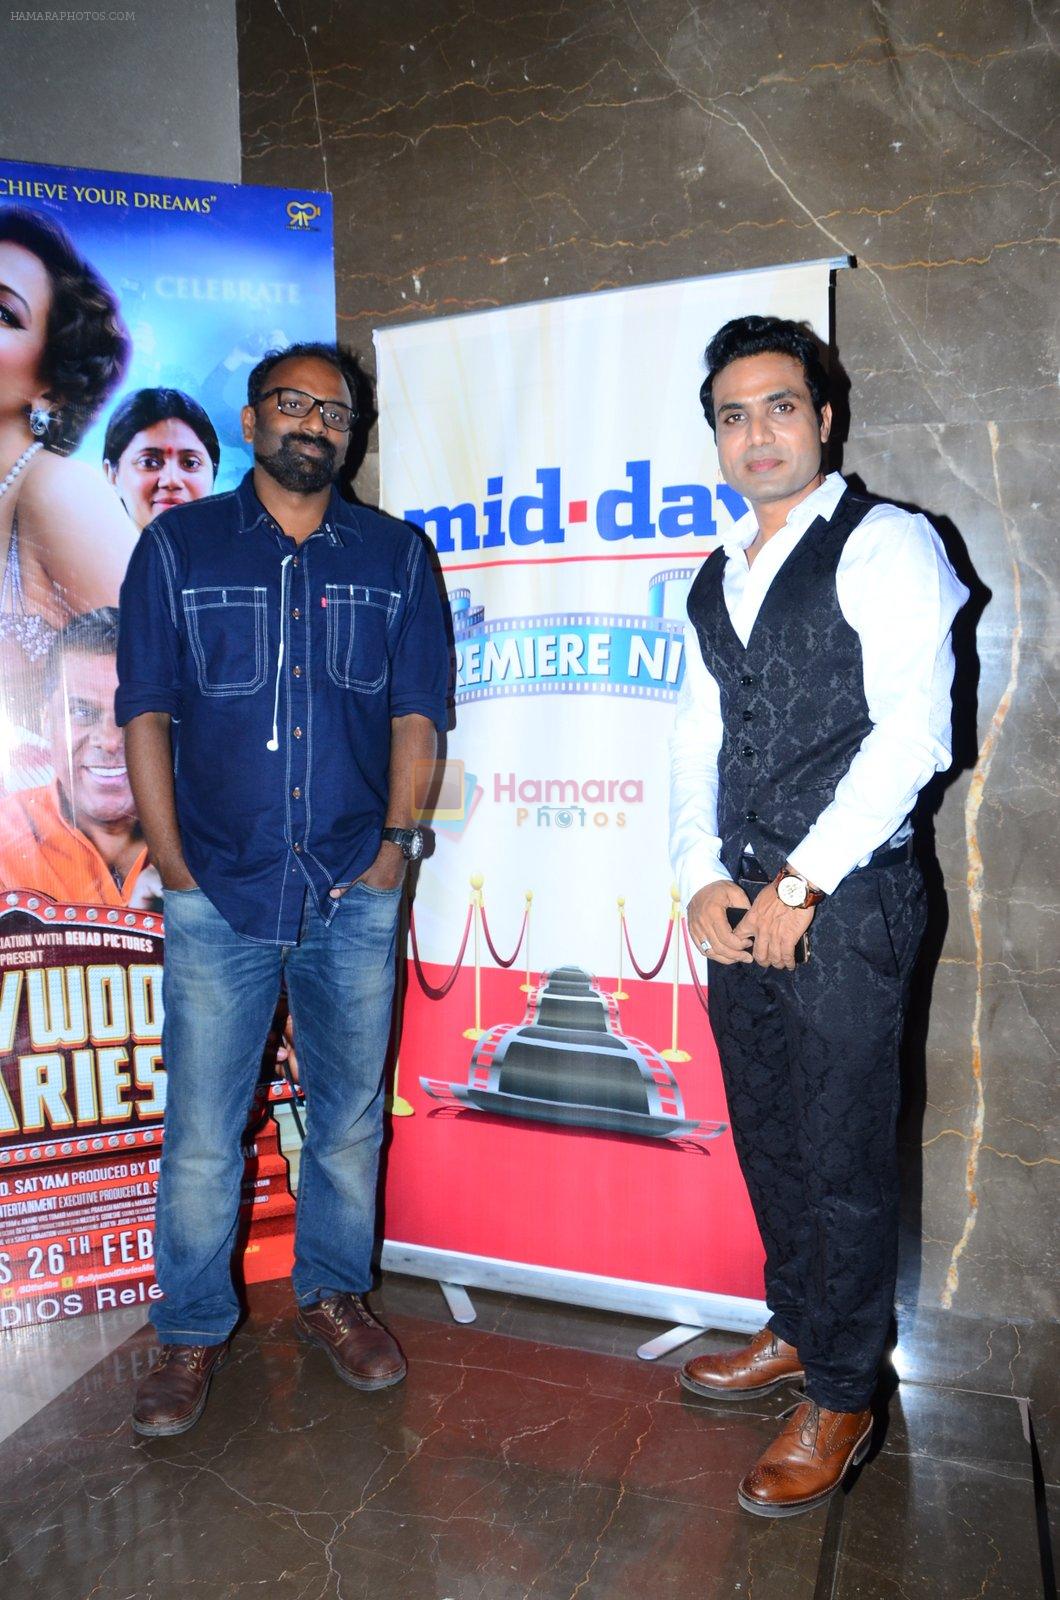 at Bollywood Diaries and Tere Bin Laden 2 screening in Cinepolis on 25th Feb 2016